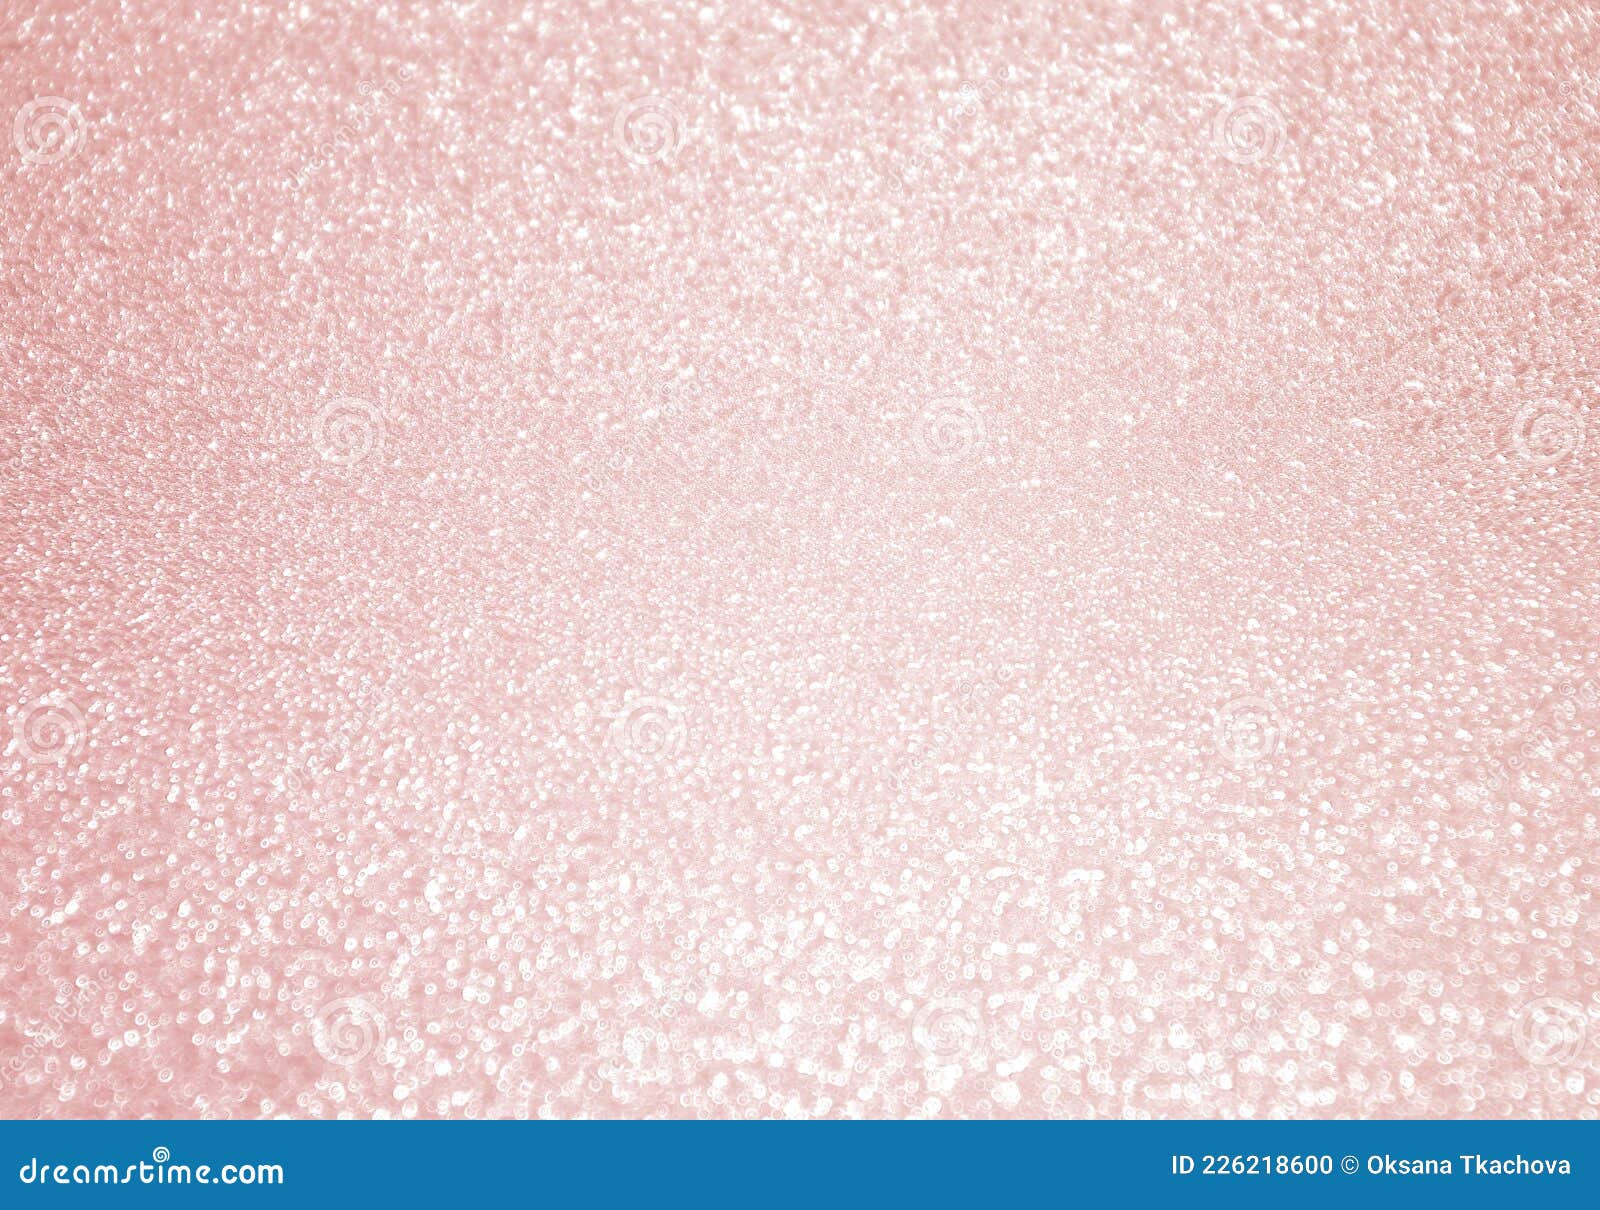 Pastel Pink Glitter Texture Background with Bokeh Stock Photo - Image of  glitter, party: 226218600